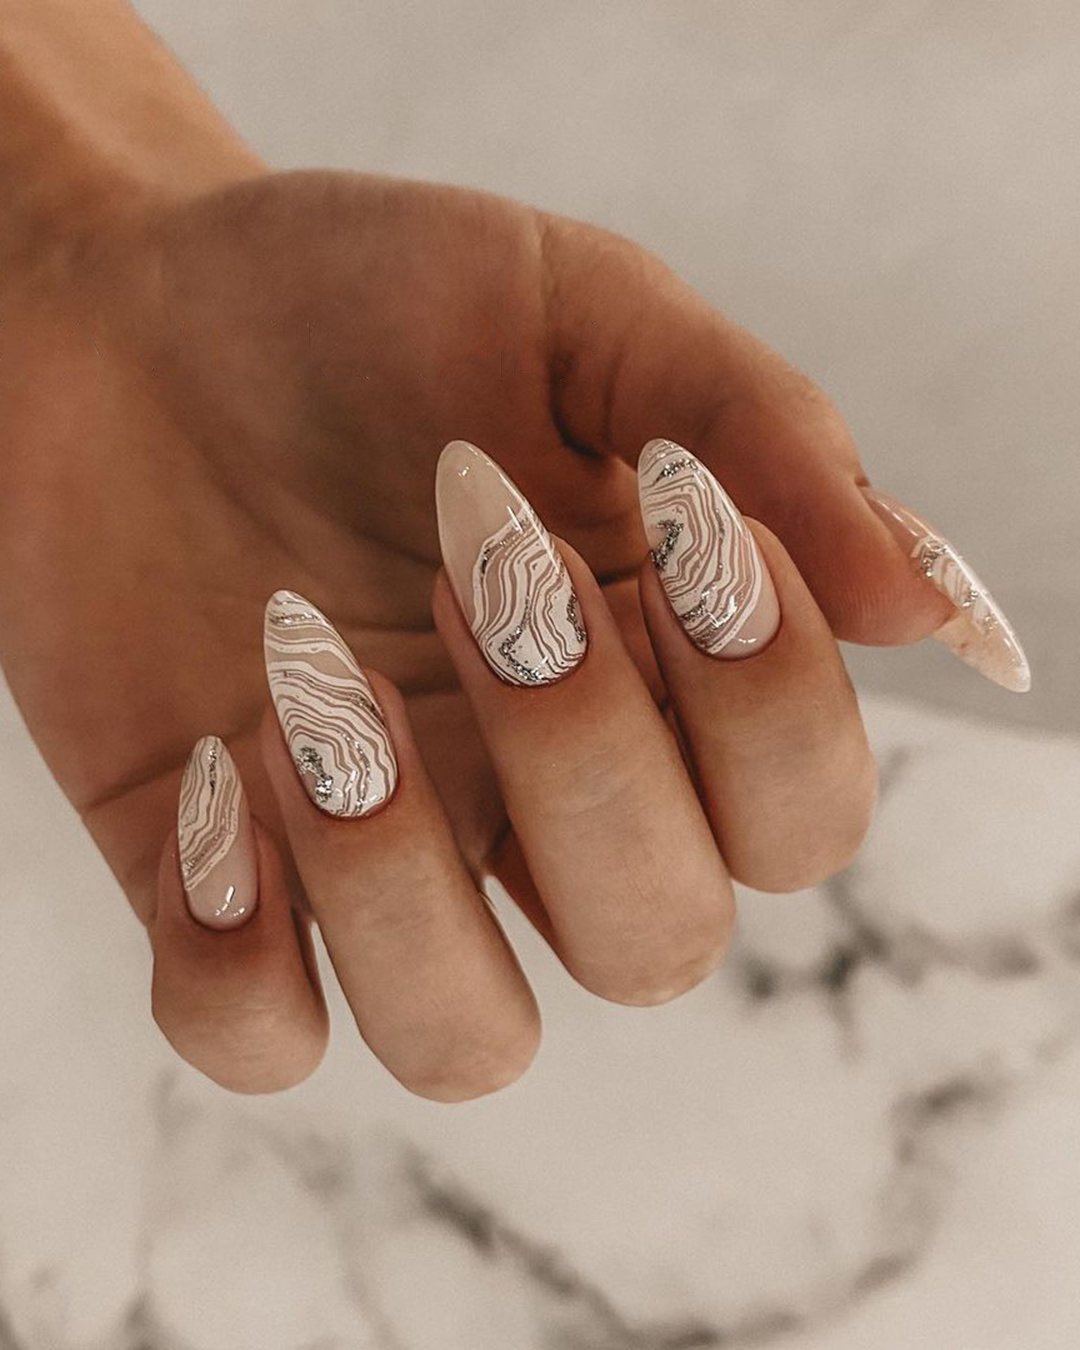 nail ideas for wedding pink white with lace shabalina_nails